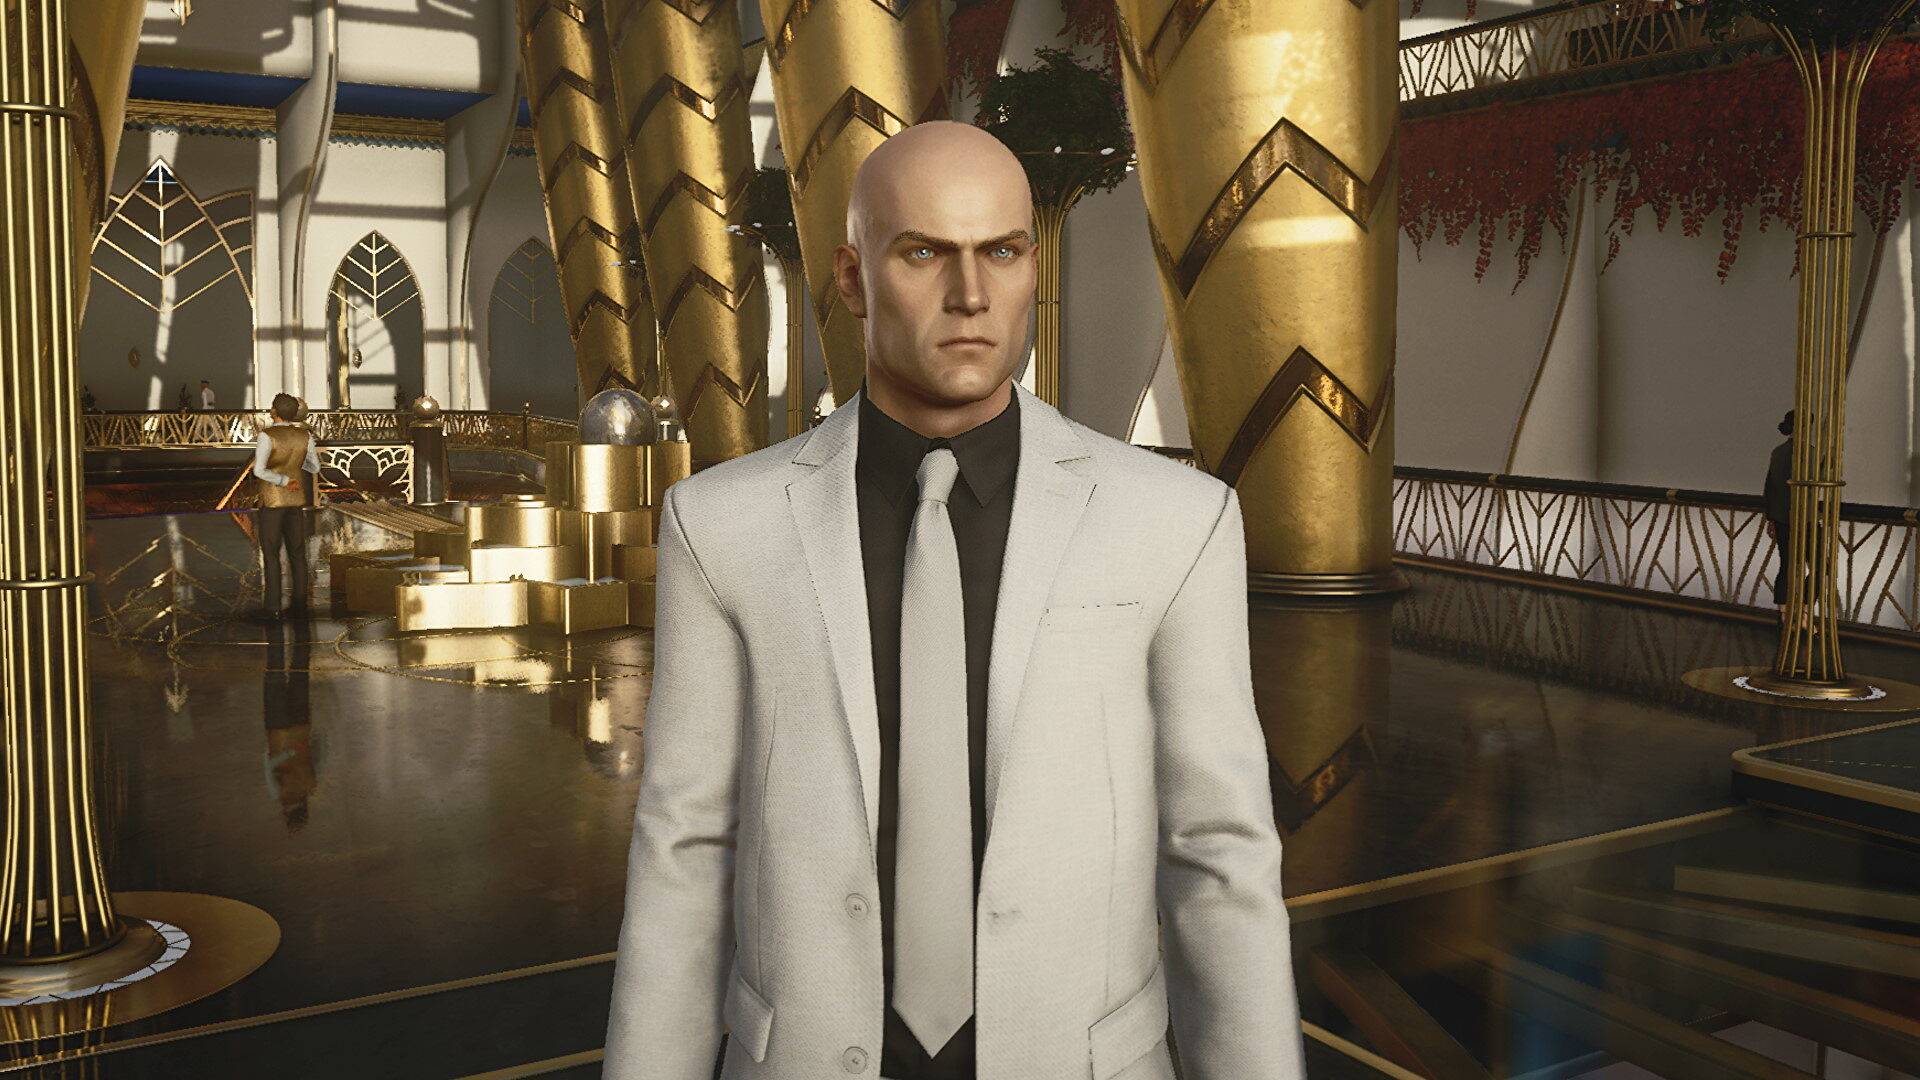 best spy games: a very bald hitman stands menacingly in a large golden room